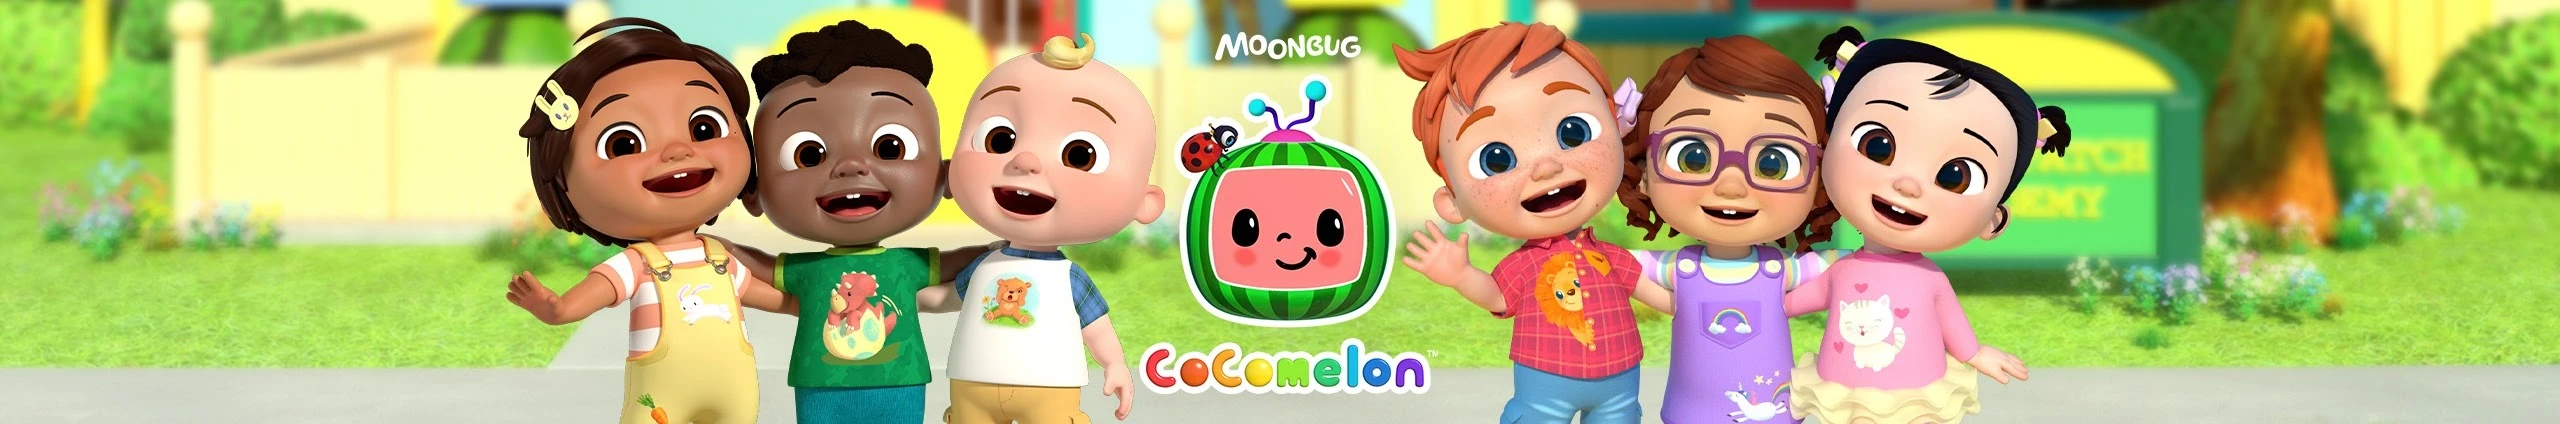 Cocomelon - Nursery Rhymes's BANNER